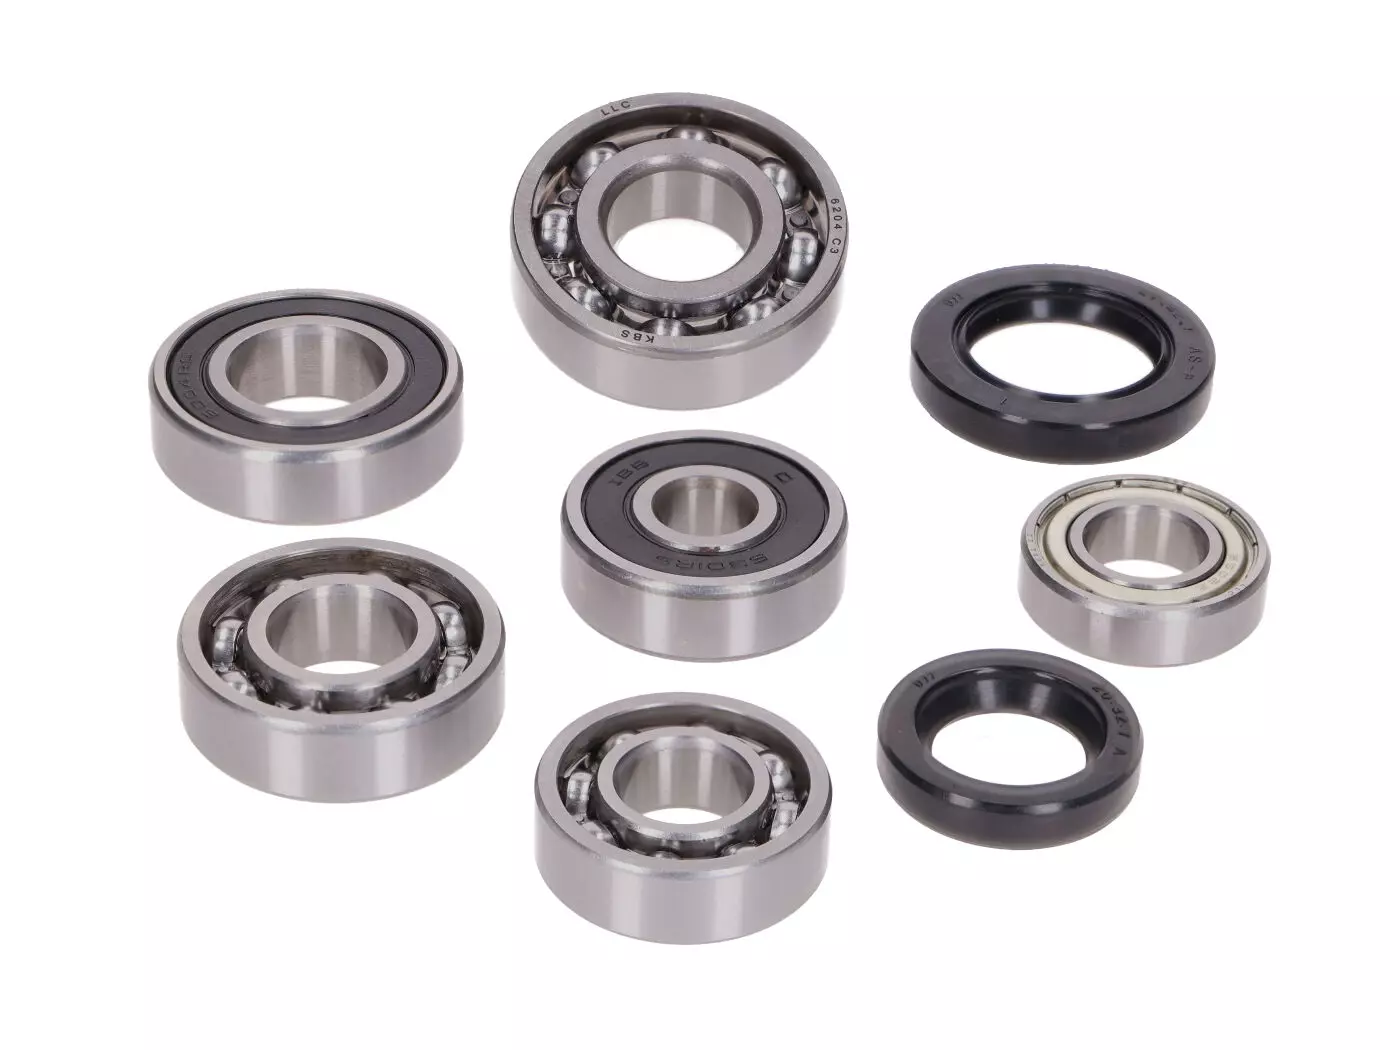 Gearbox Bearing Set W/ Oil Seals For 152QMI 125, 150 4-stroke China